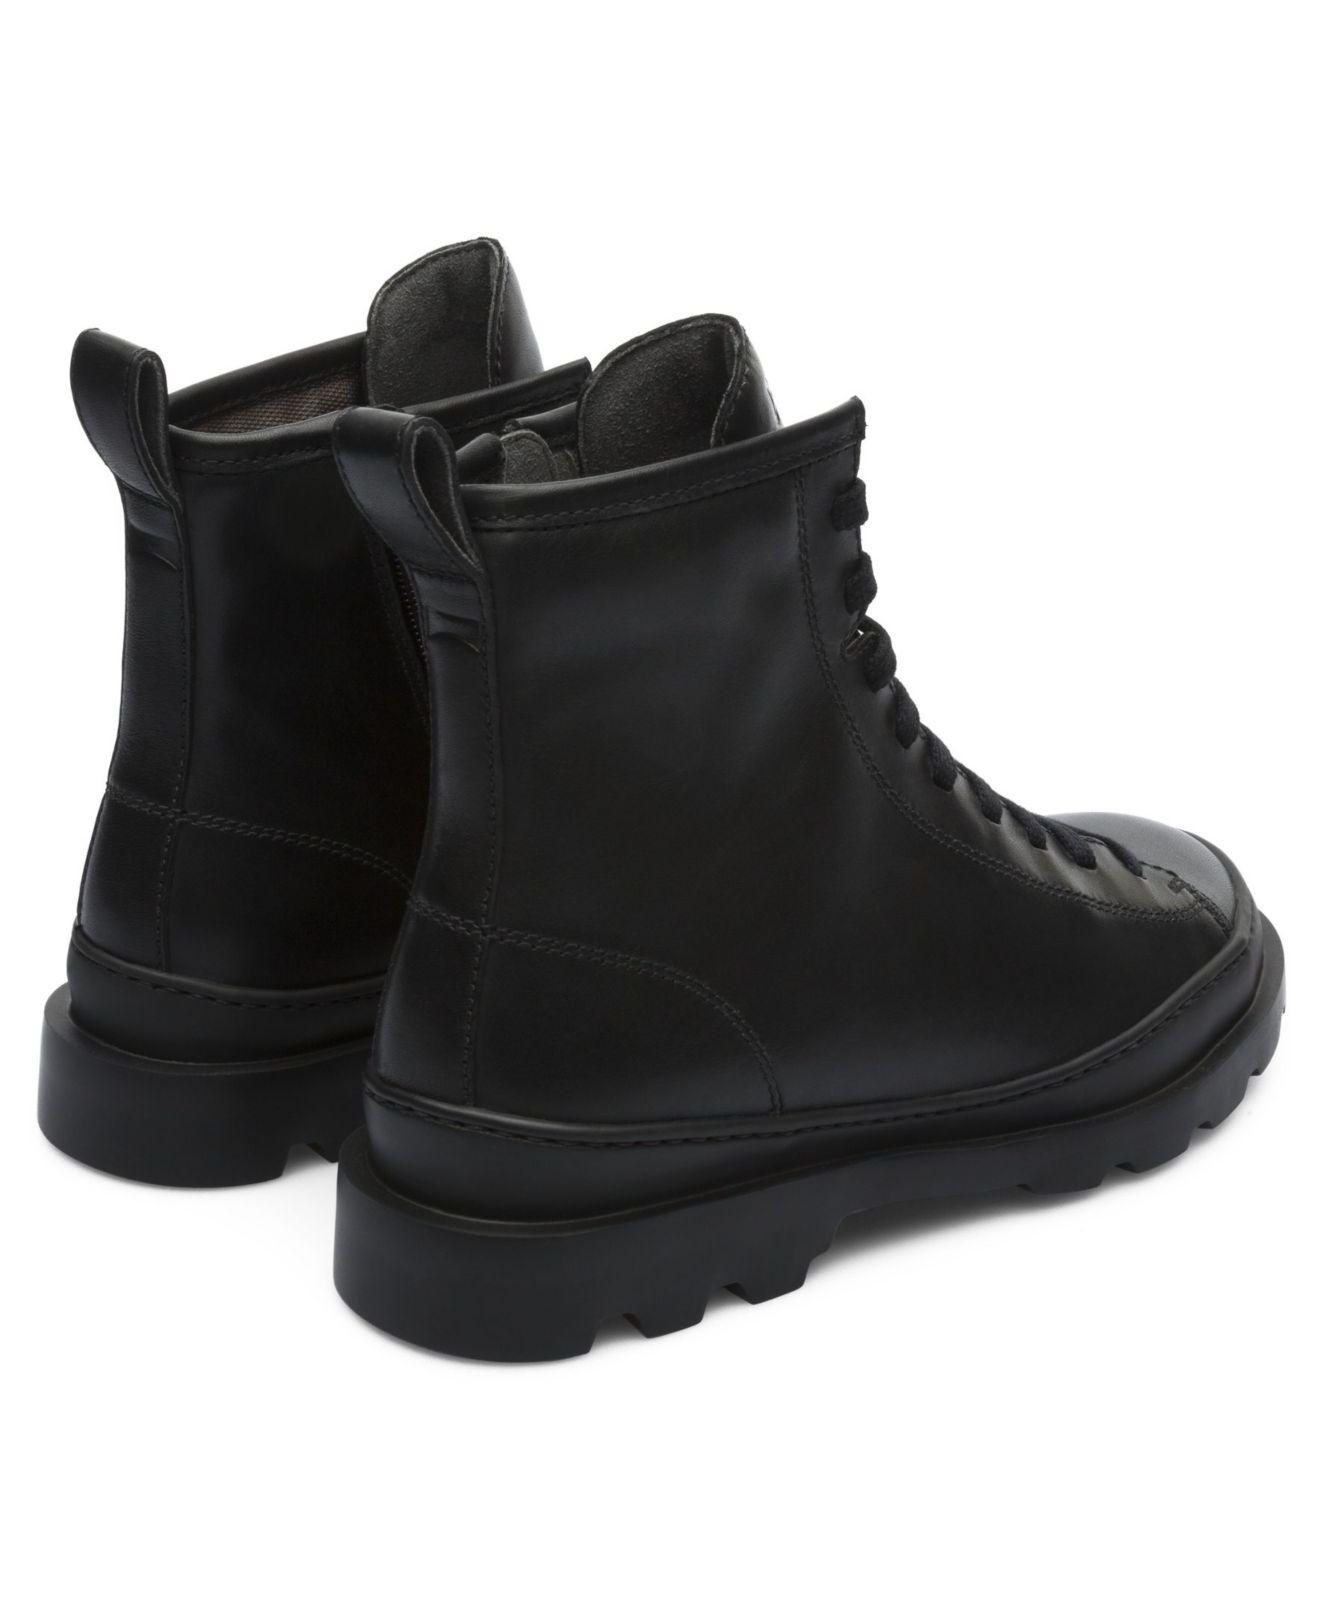 Camper Leather Brutus Boots in Black - Lyst